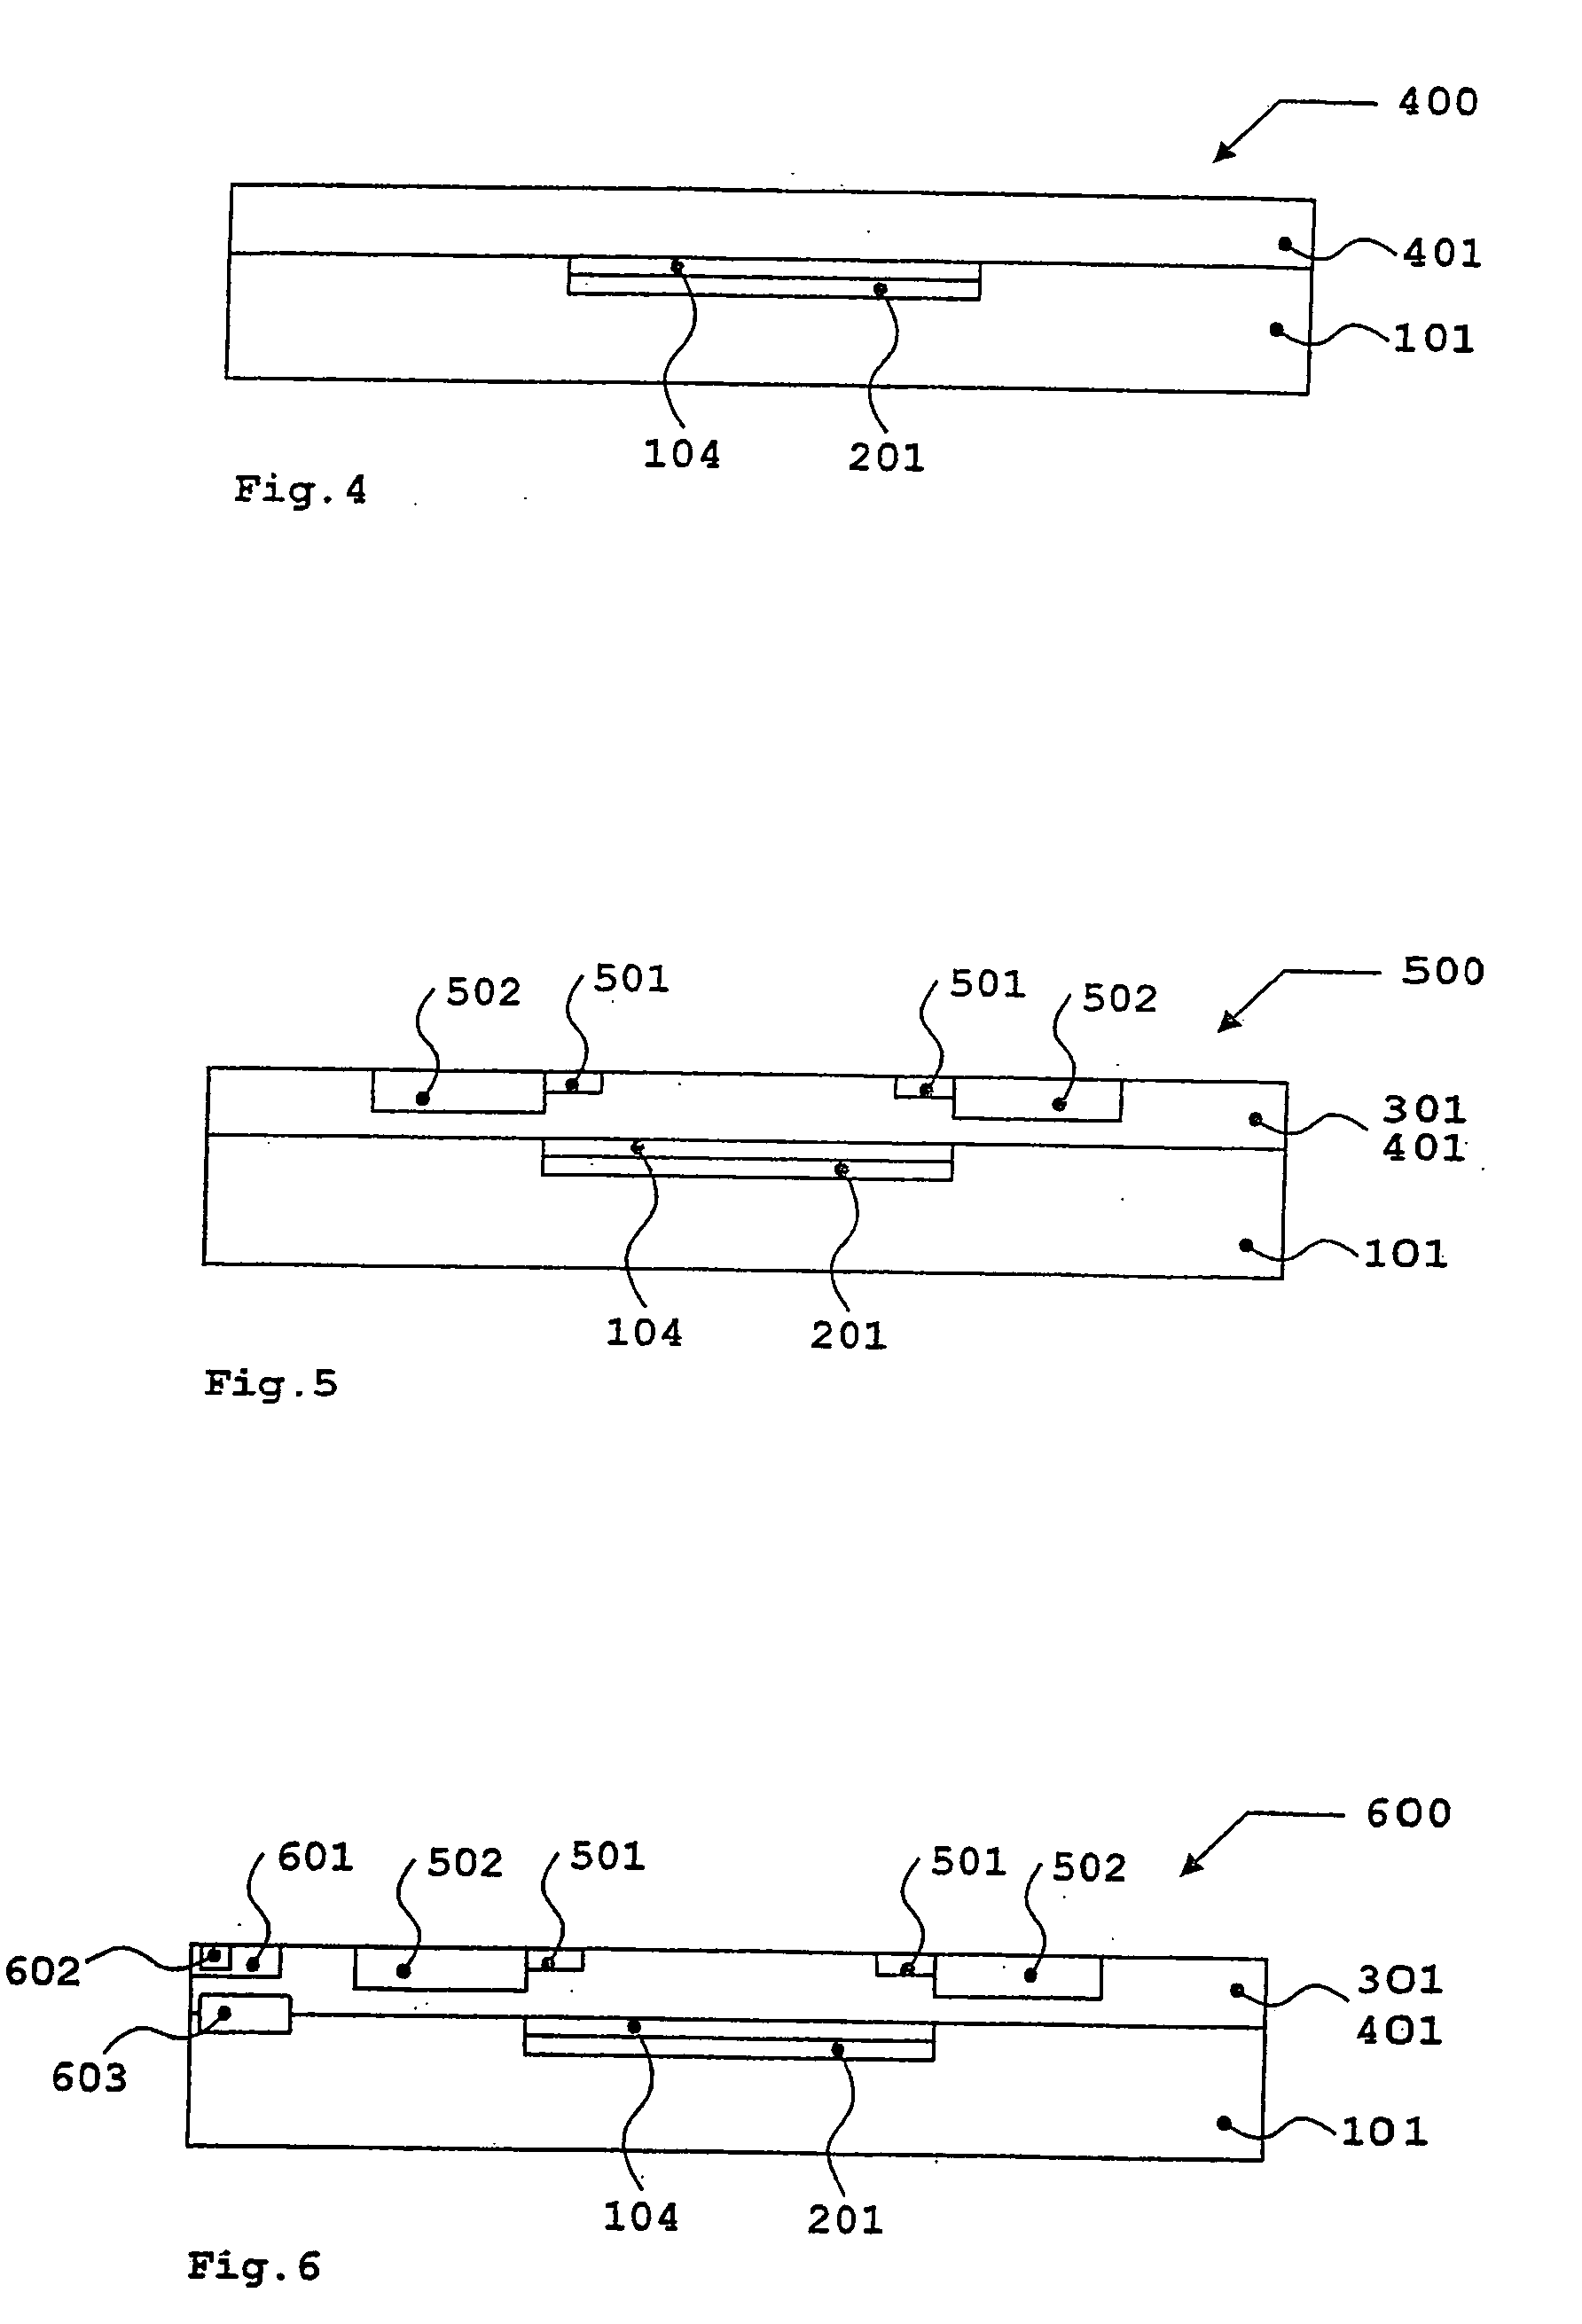 Method for producing a semiconductor component and a semiconductor component produced according to the method